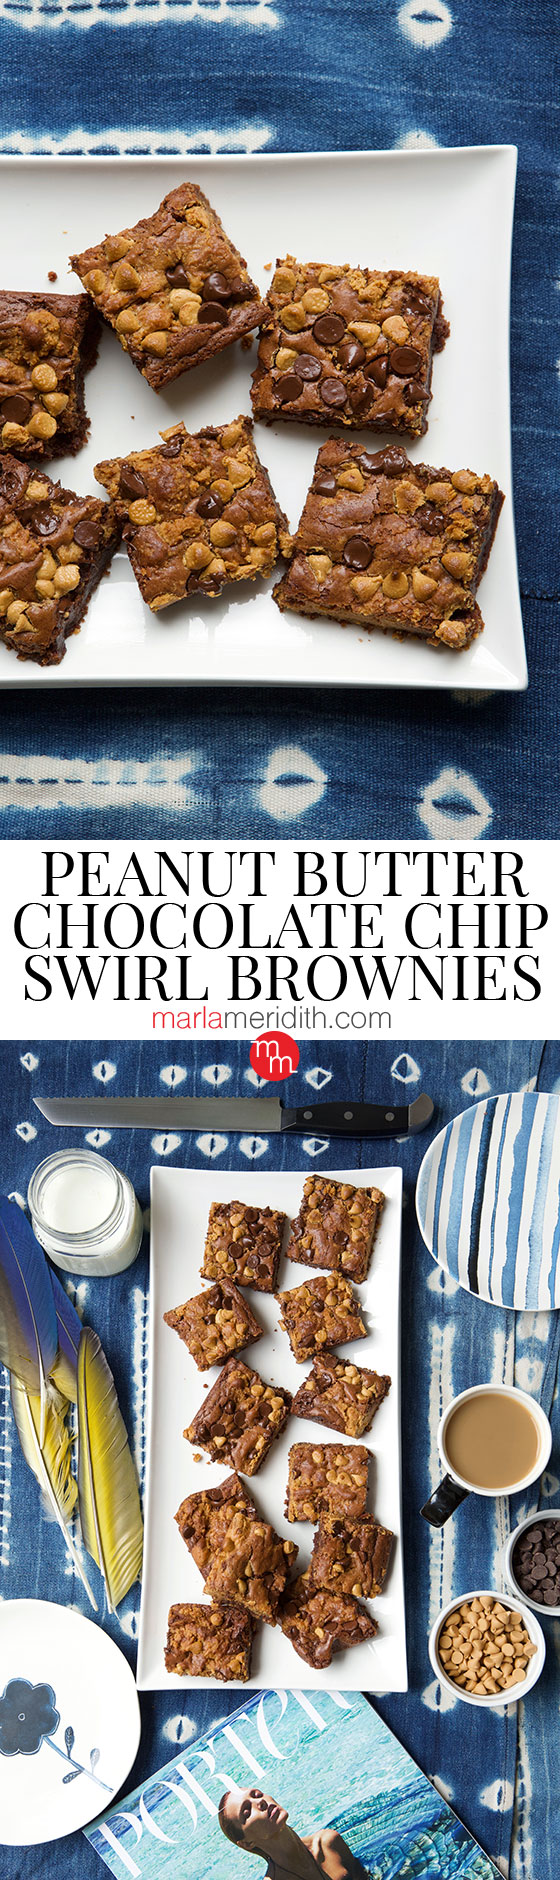 Get the recipe for these irresistible Peanut Butter Chocolate Chip Swirl Brownies on MarlaMeridith.com